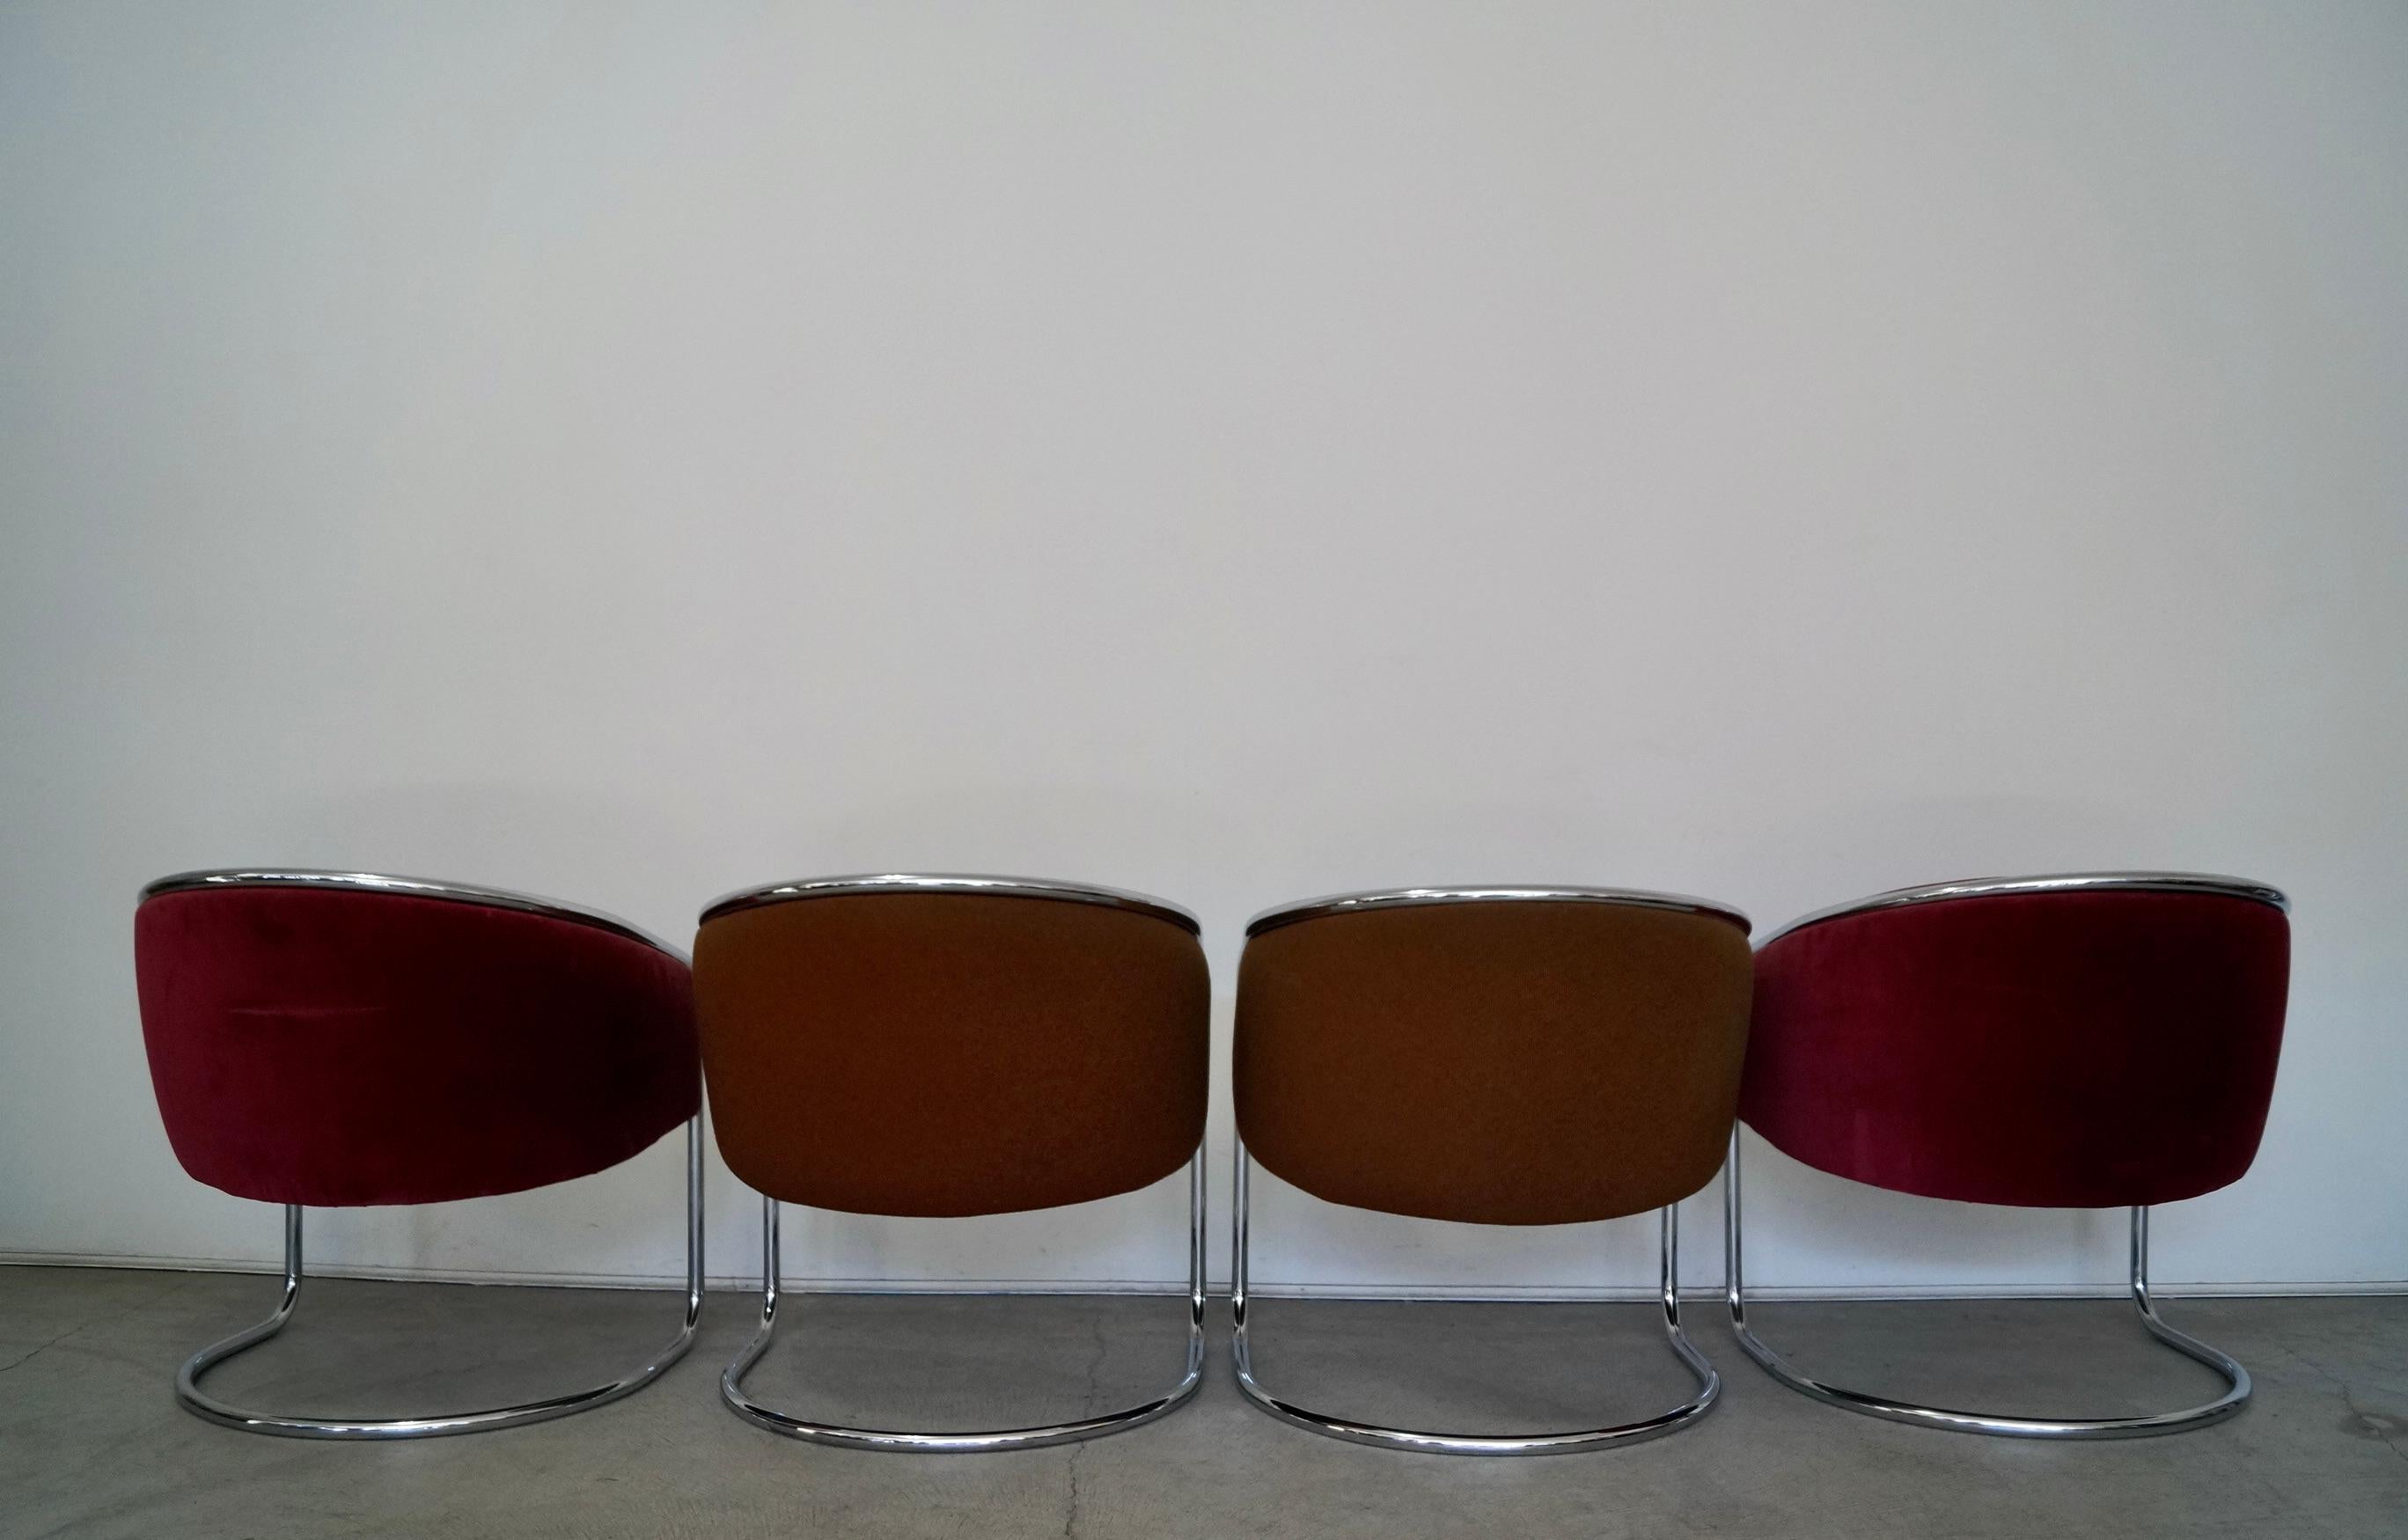 1970's Mid-Century Modern Thonet Chrome Armchairs - Set of Four For Sale 2